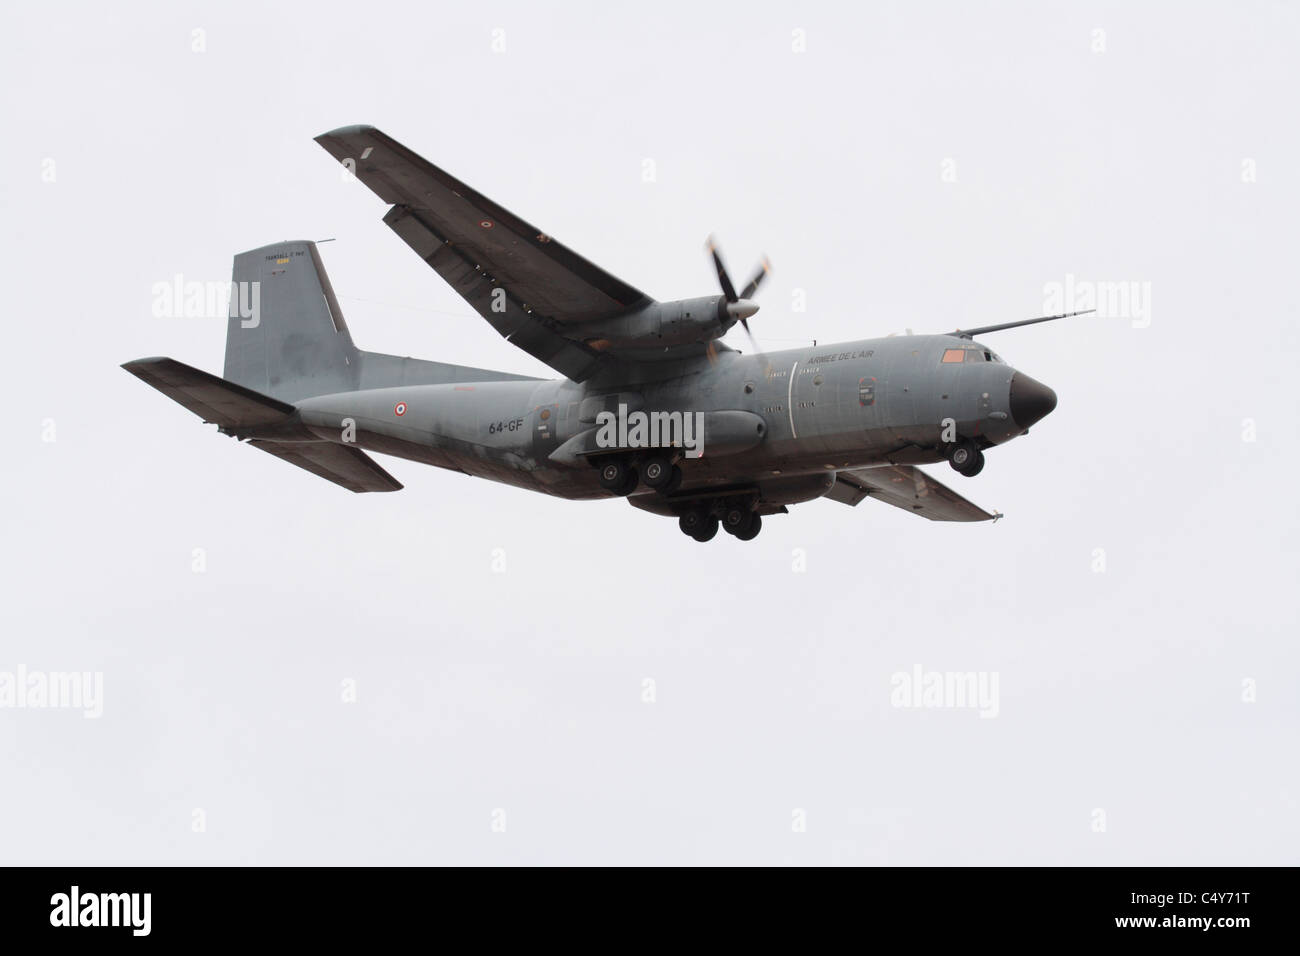 Francese Air Force Transall C-160 airlifter tattico Foto Stock